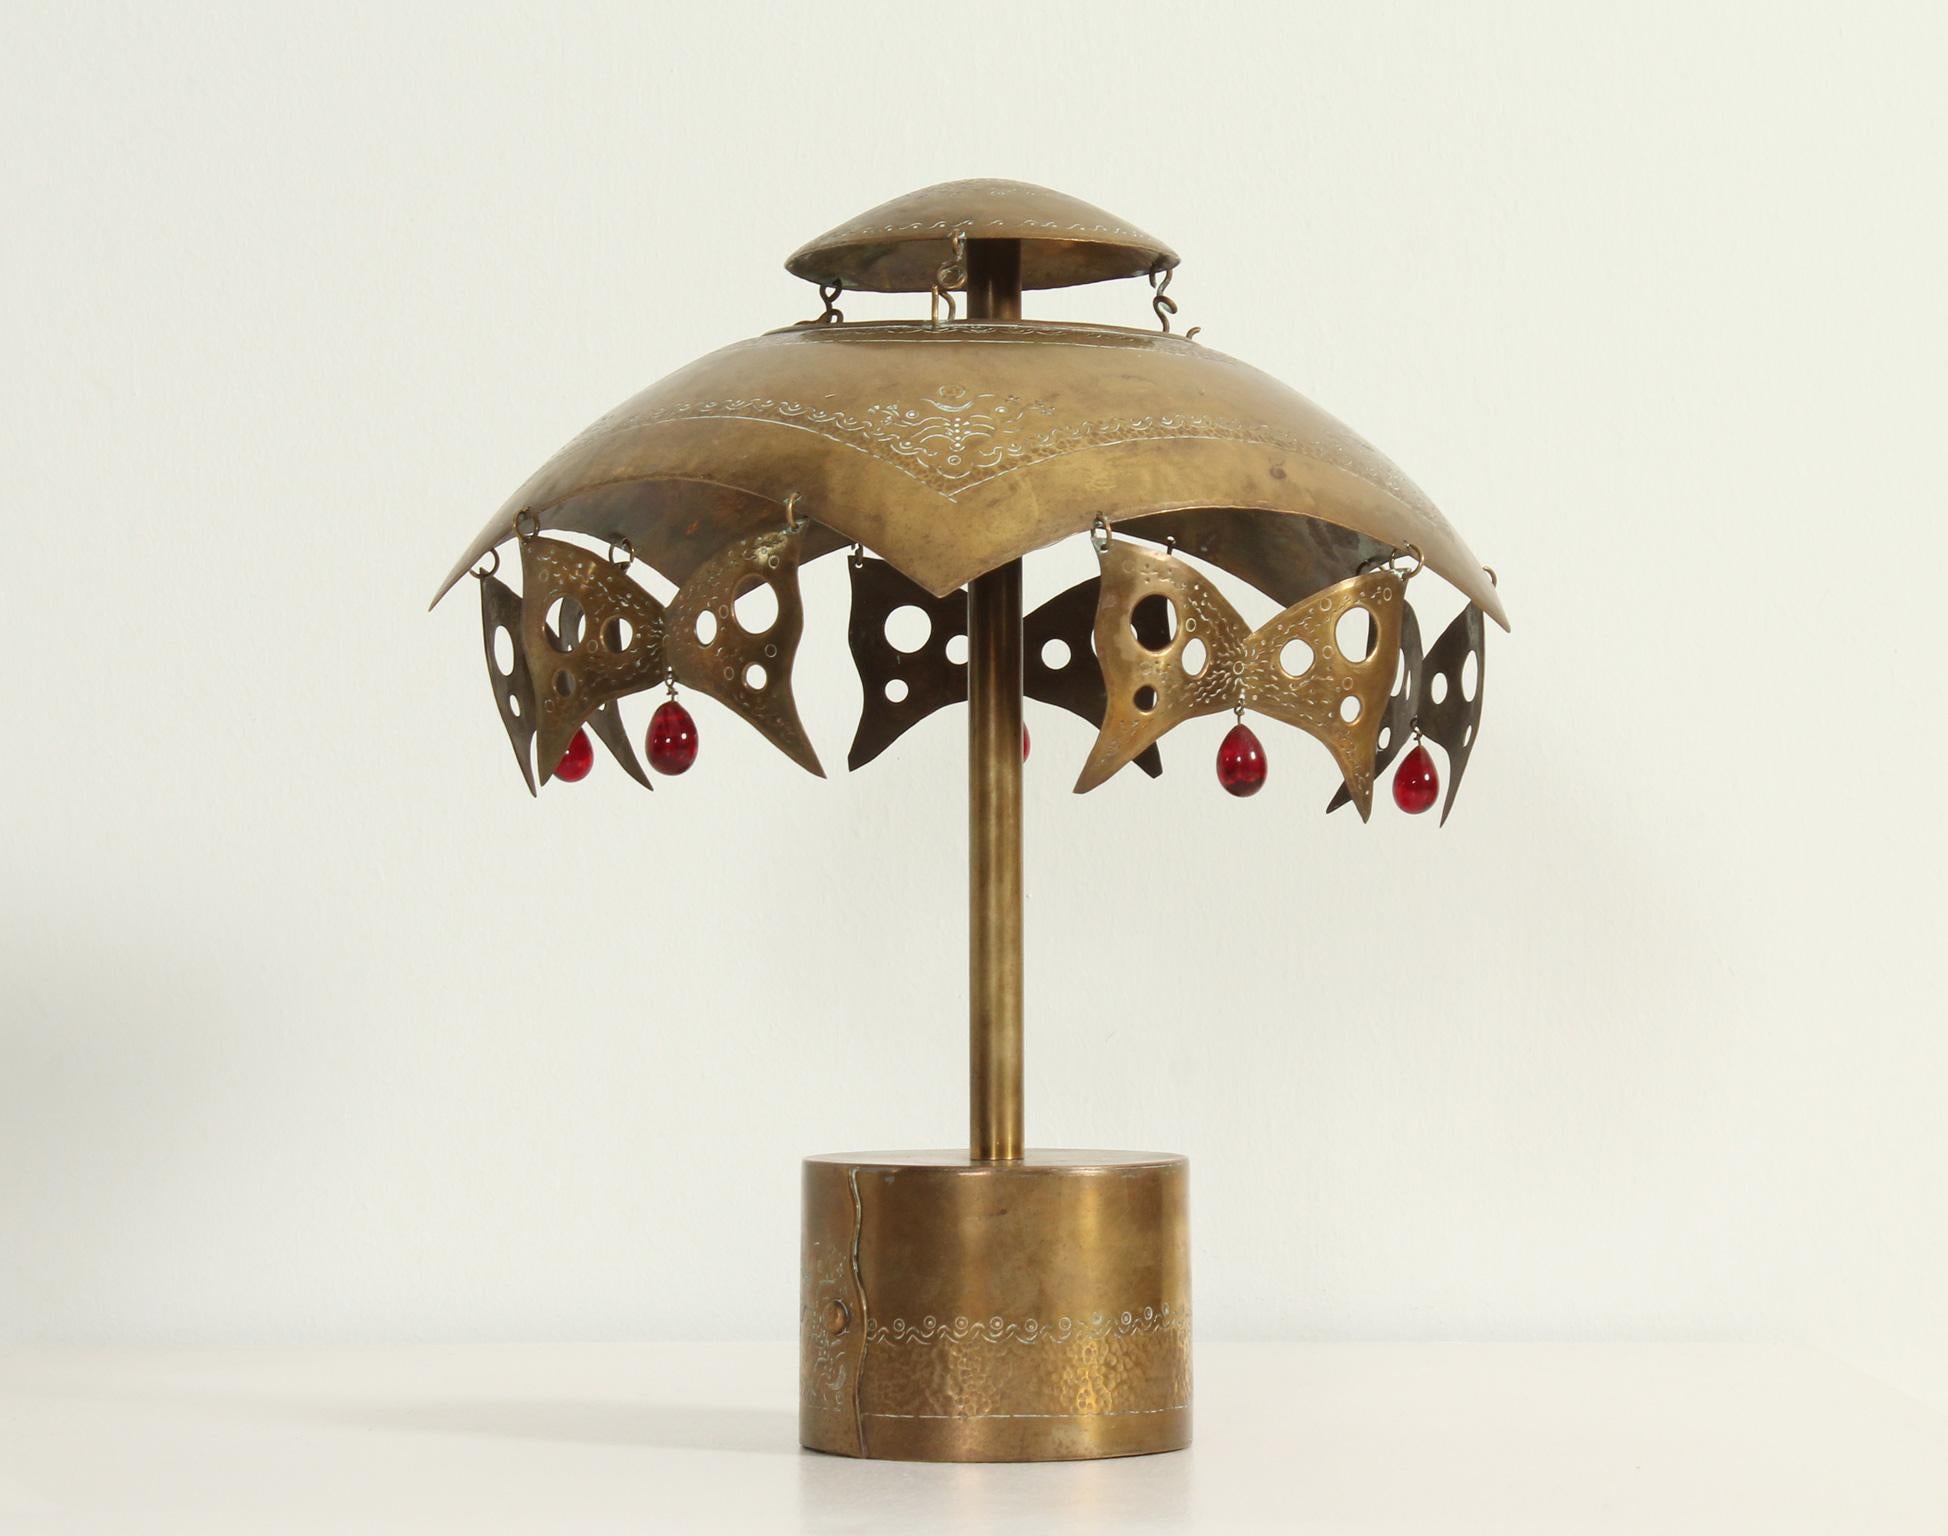 Turkish table lamp from 1950's. Embossed brass and colored glass beads. Nice effect of the reflection of the masks in the wall.